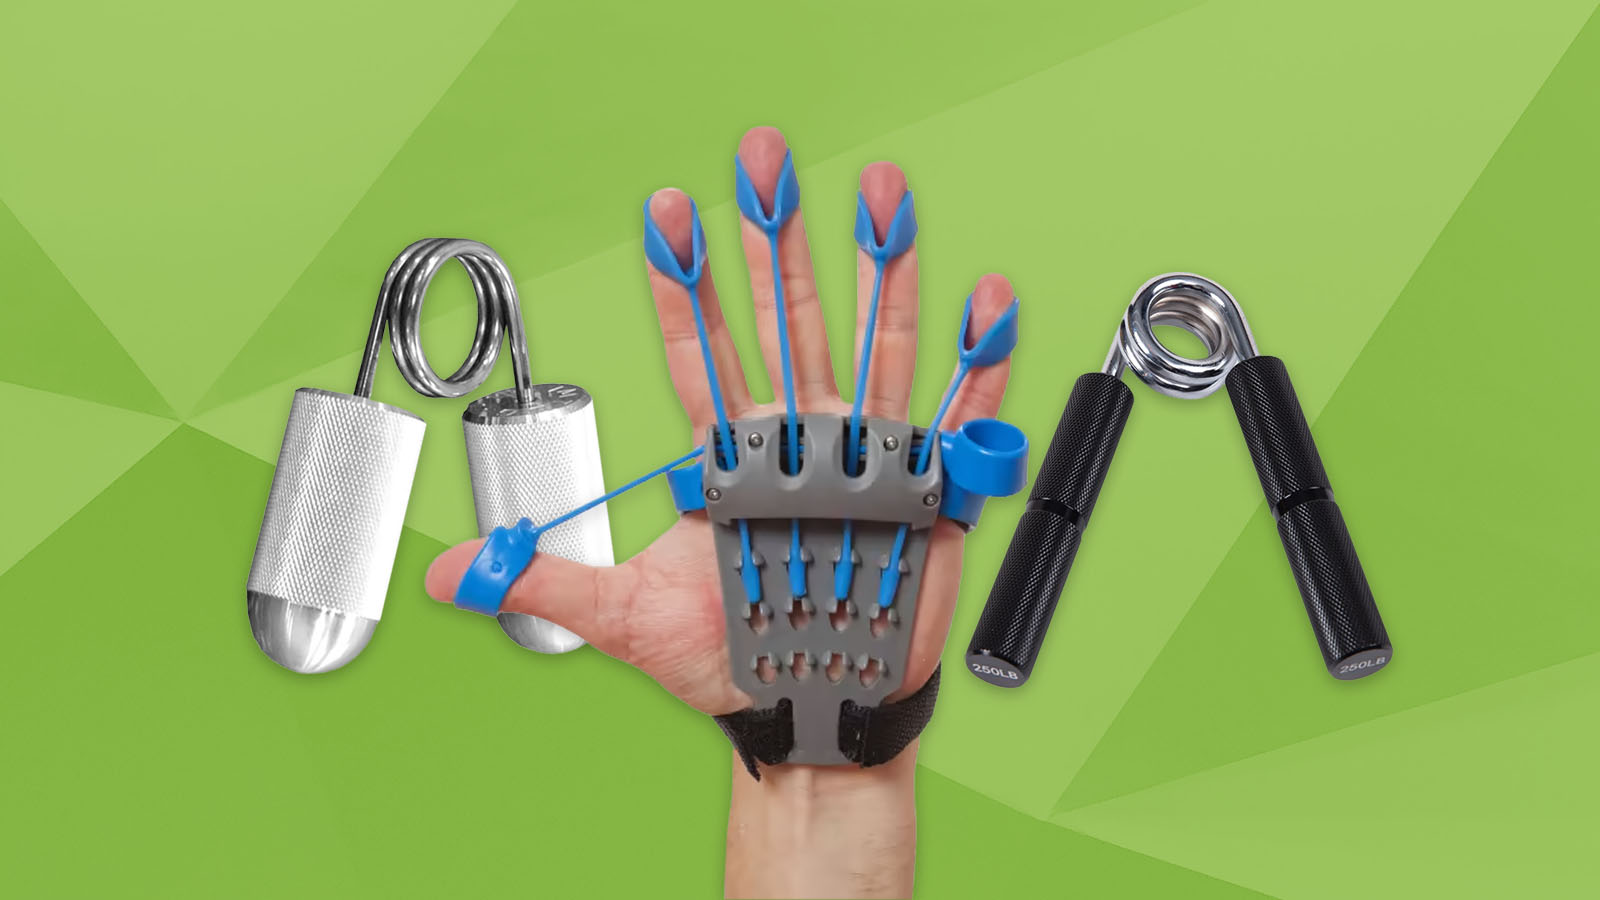 Fitness Hand Grippers for sale